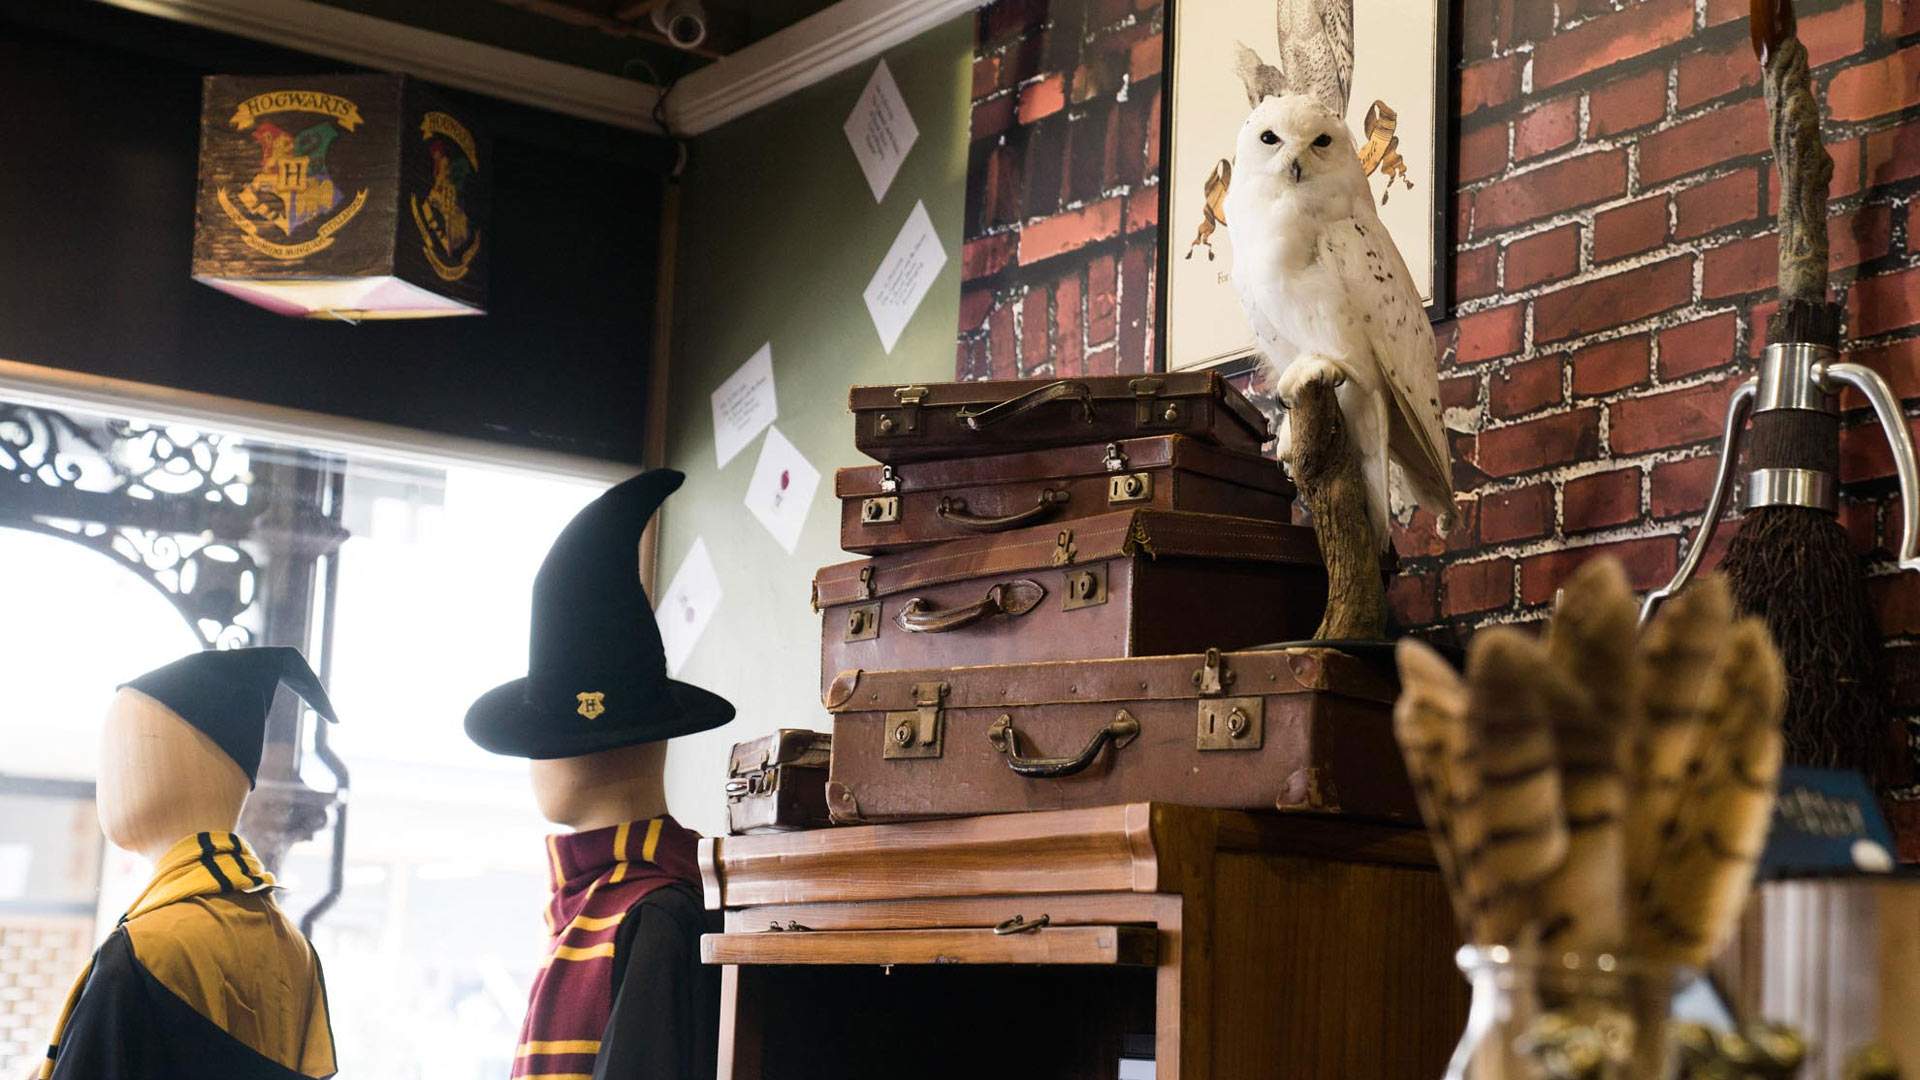 Melbourne First Dedicated 'Harry Potter' Store Is Now Open